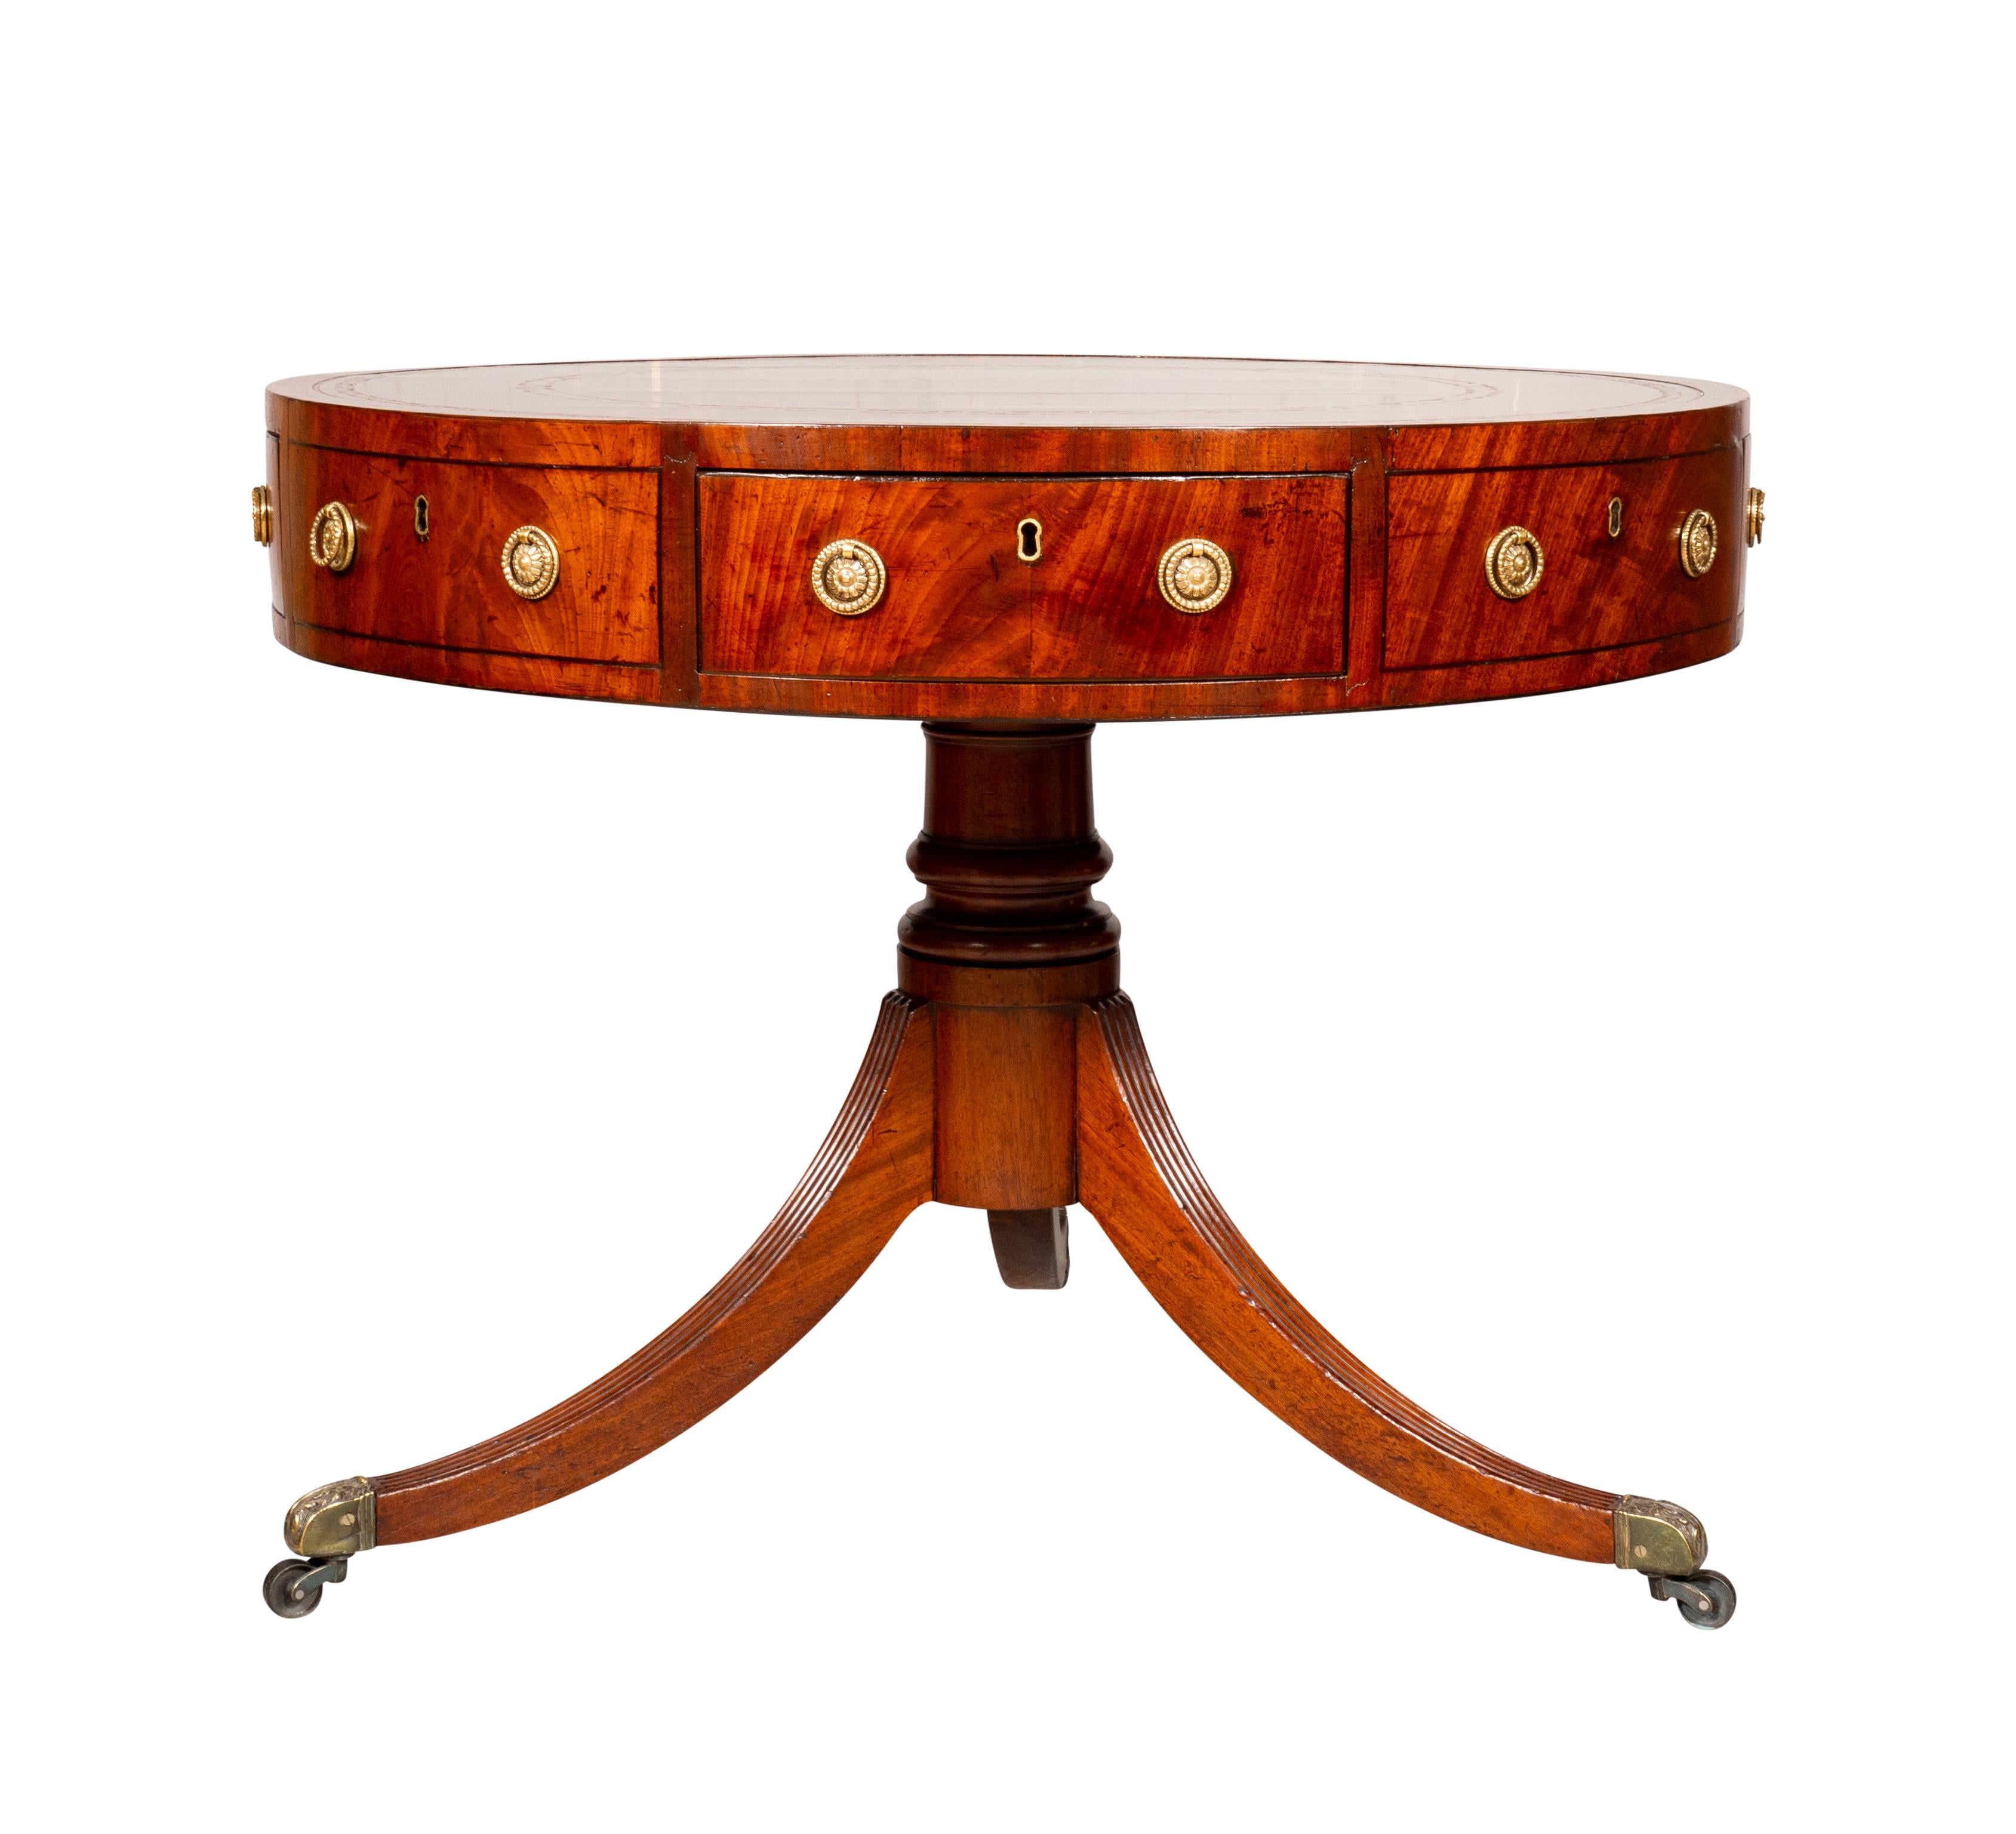 Circular cross banded top with brown tooled leather .The frieze containing drawers. Turned support joining three saber legs with casters.